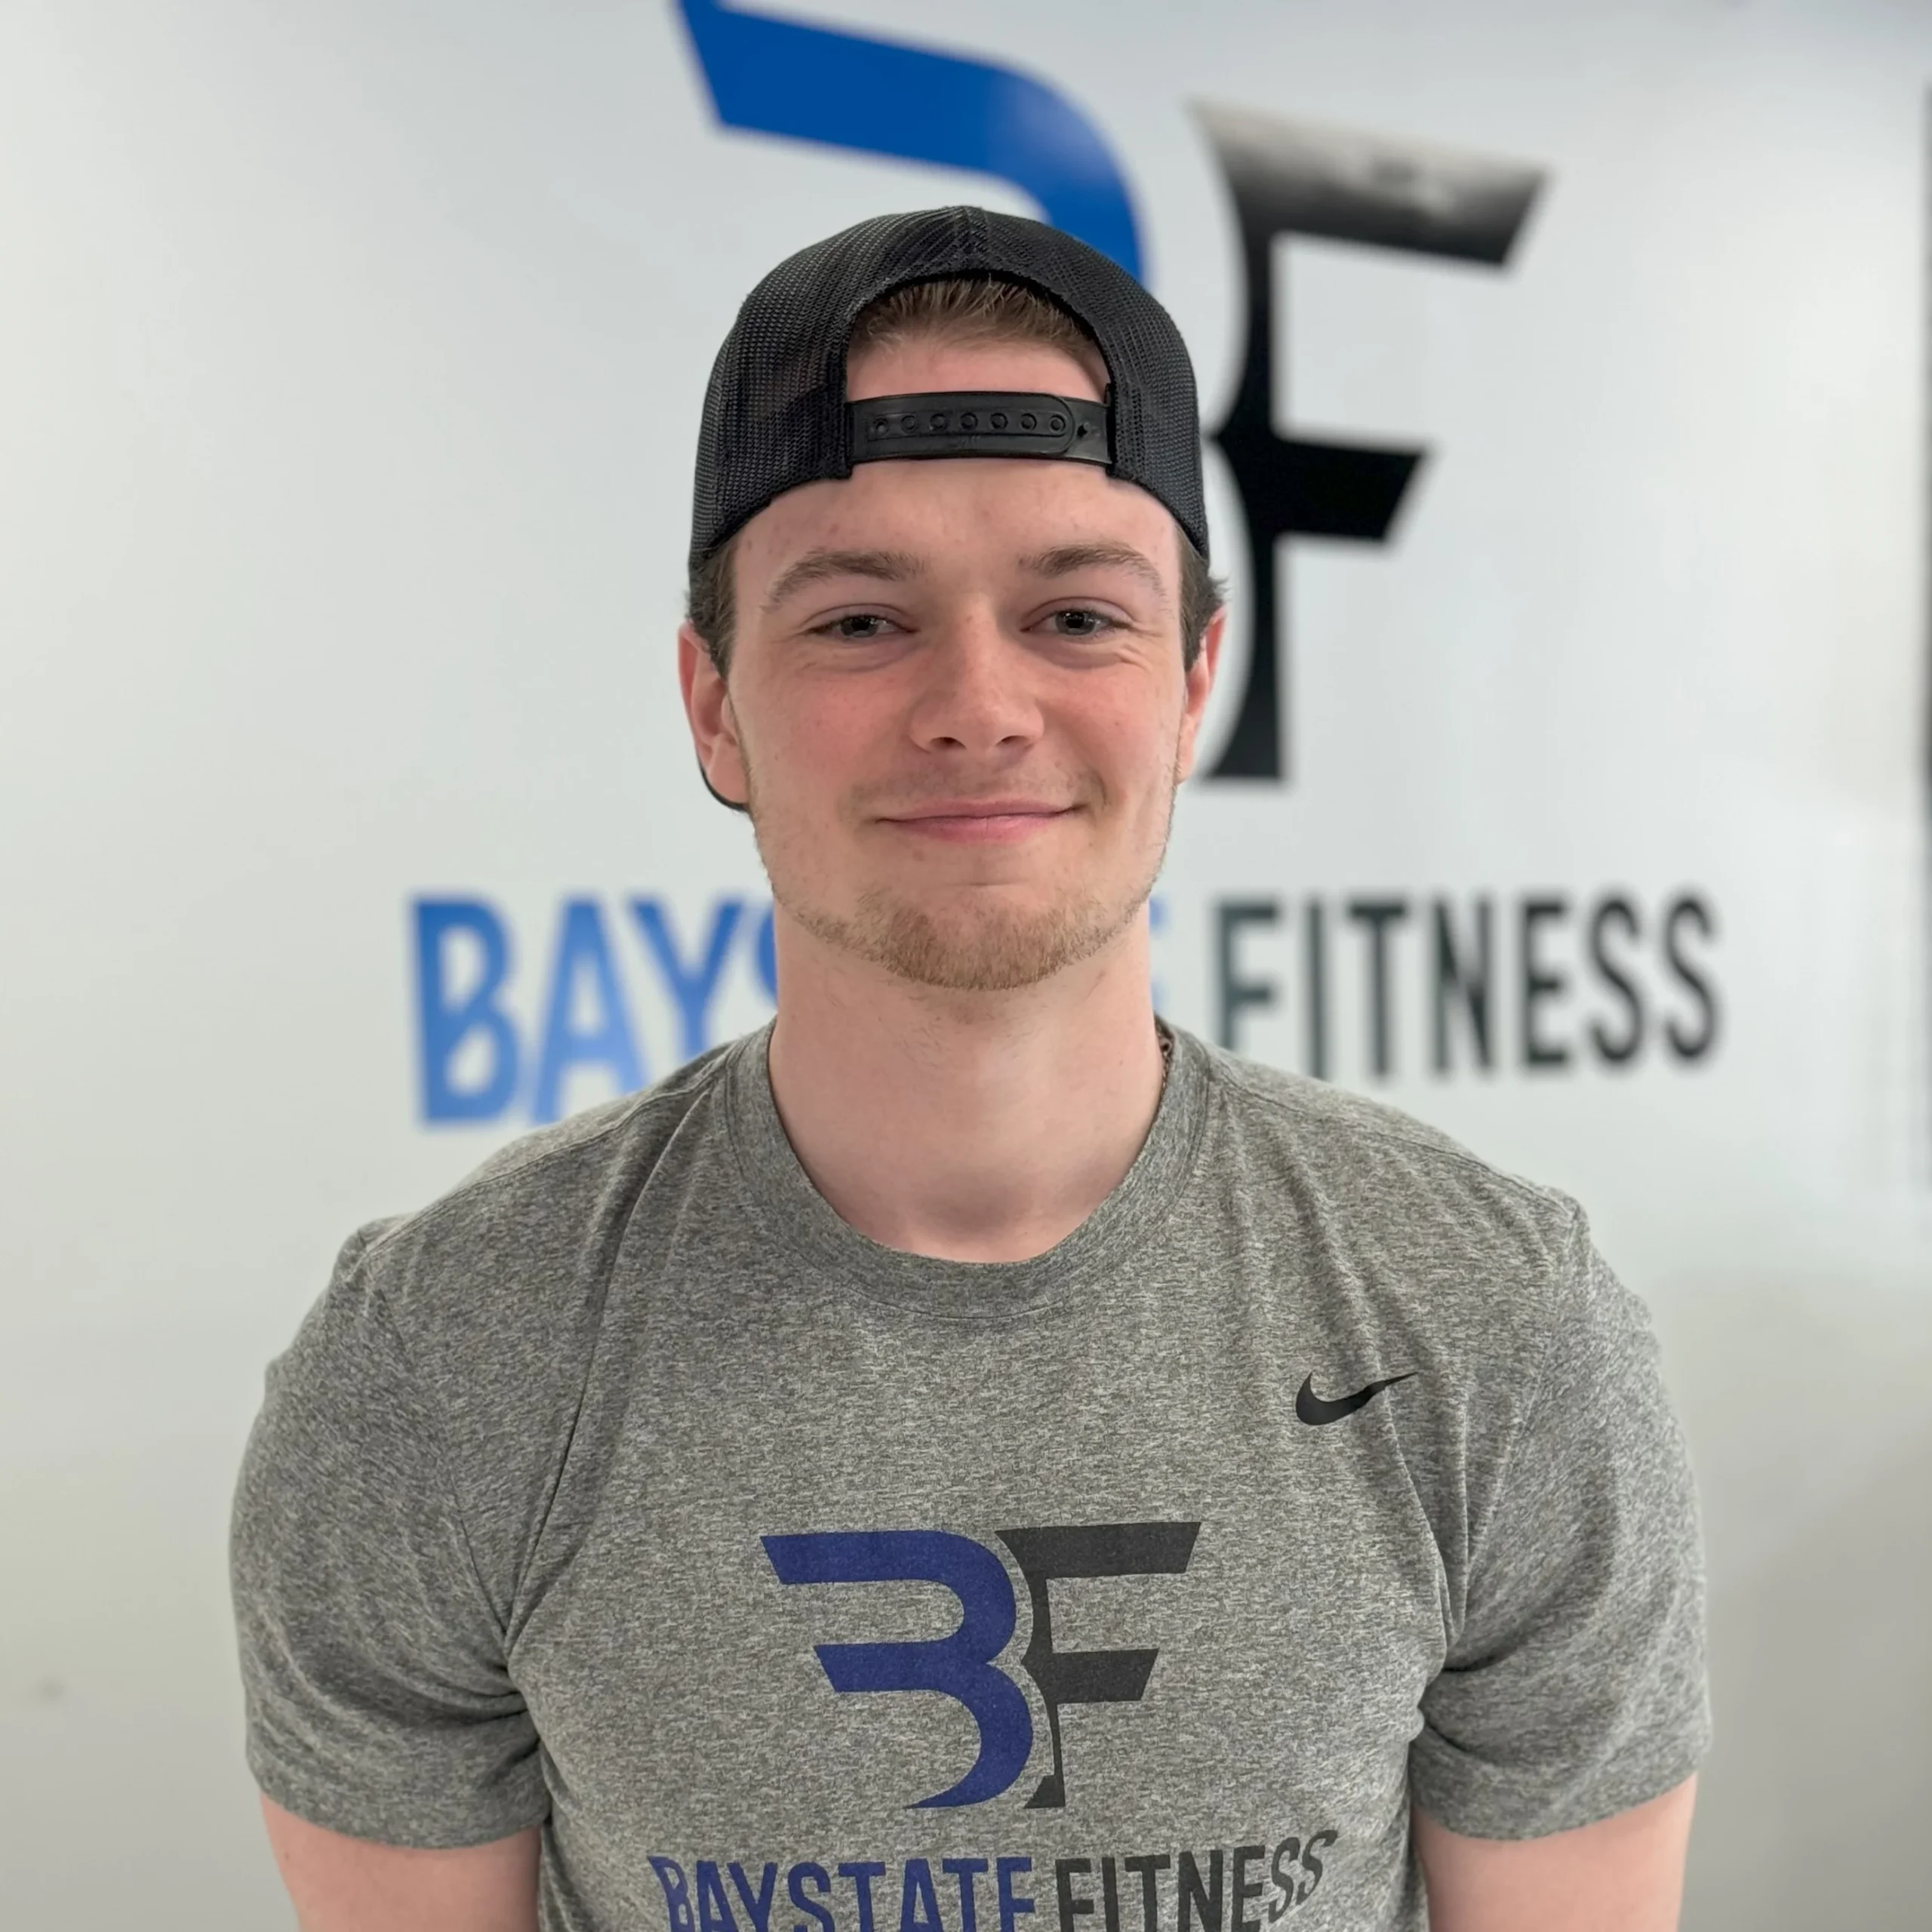 Baystate fitness personal trainter Troy